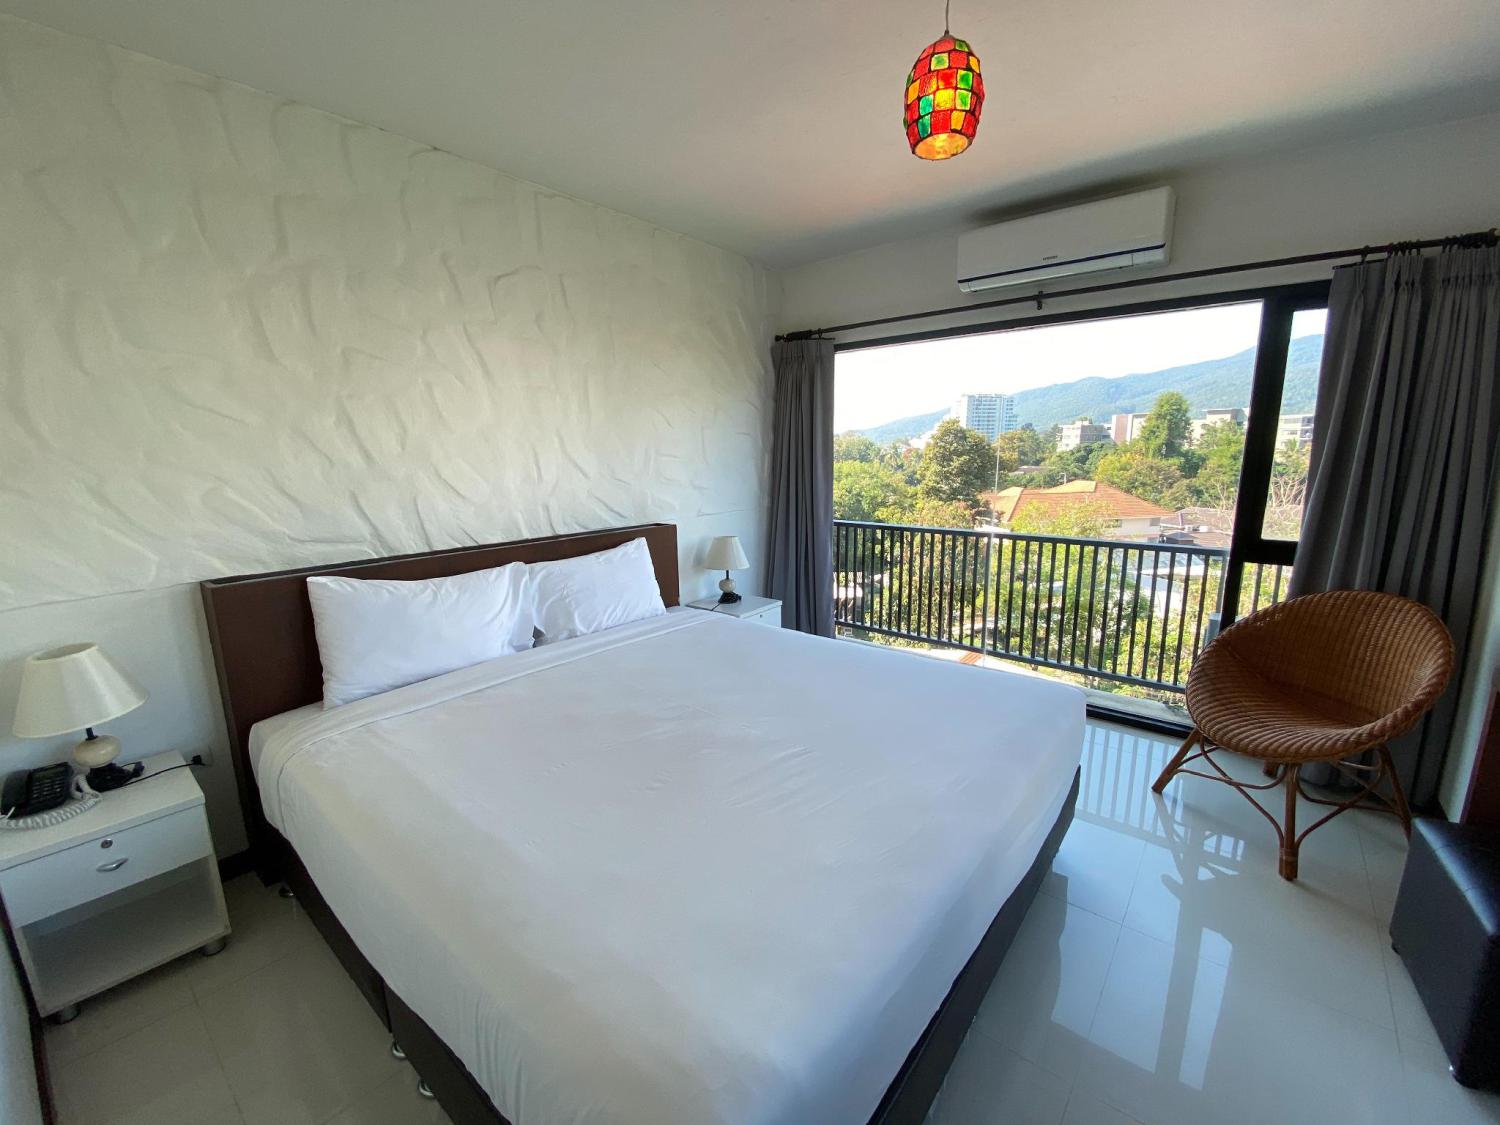 We Valley Boutique Hotel - Image 1